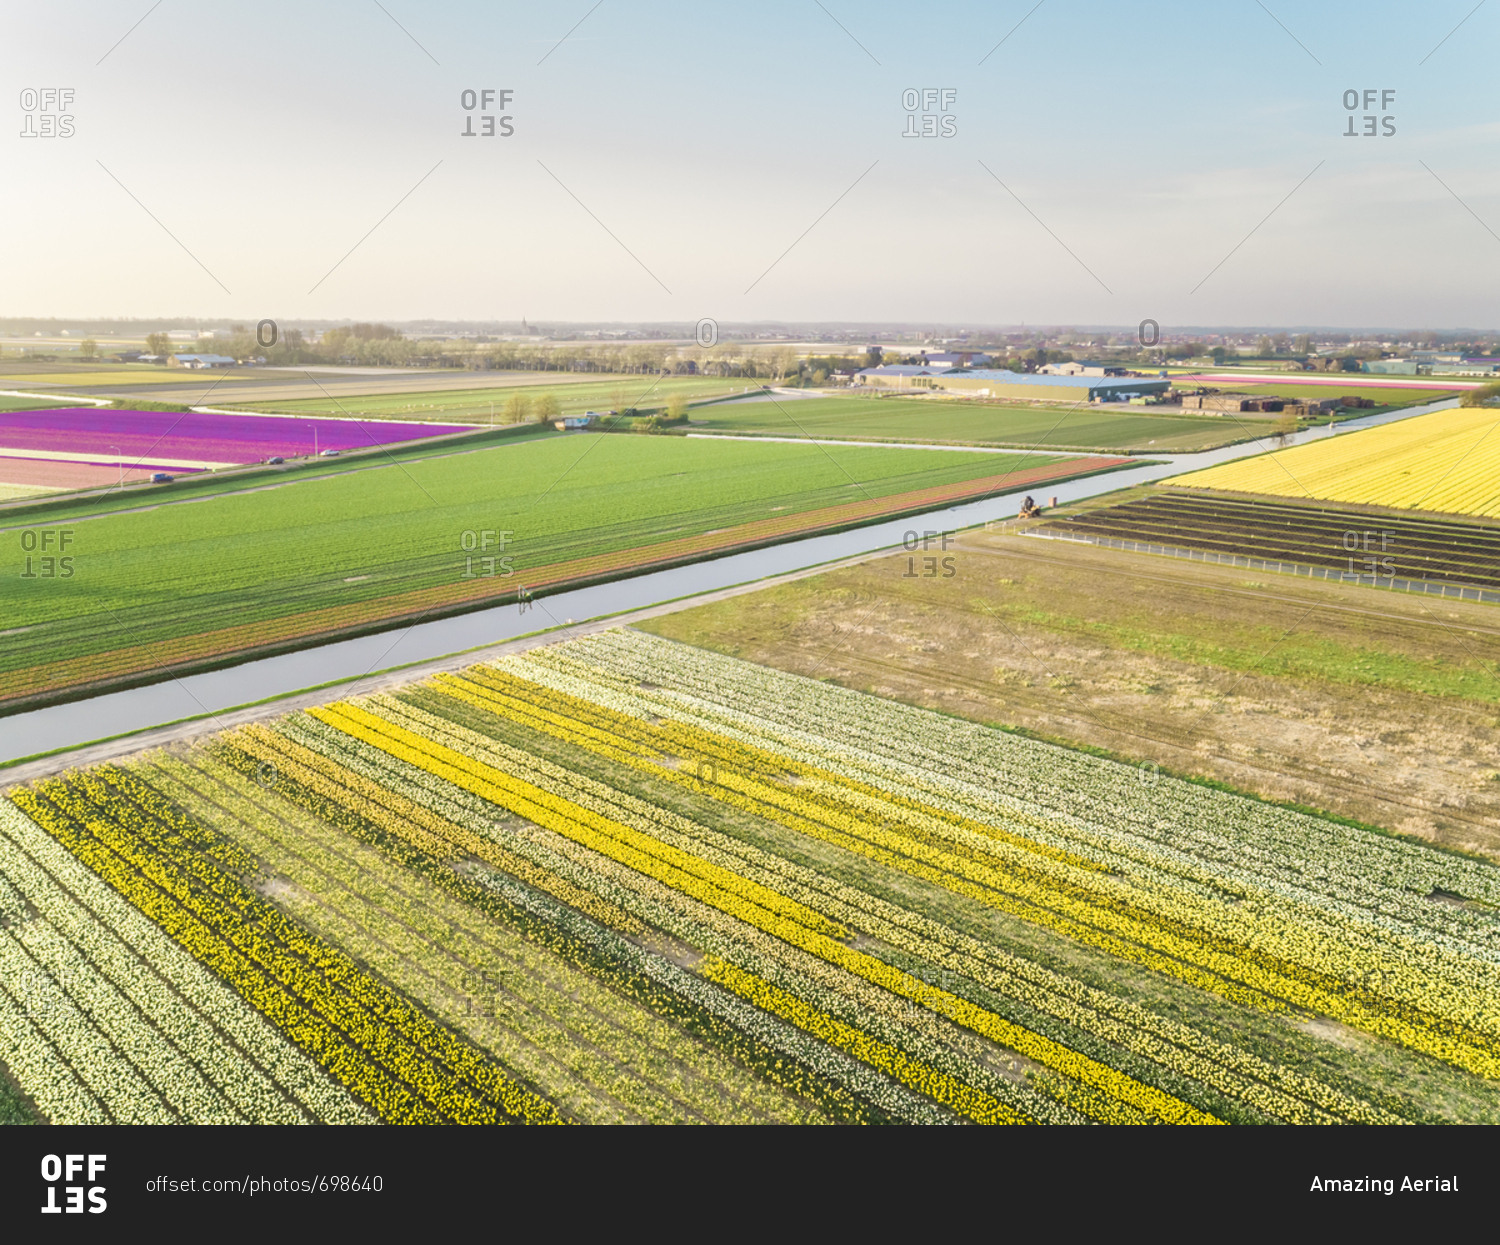 Aerial view of beautiful colorful tulip fields in Lisse, Netherlands